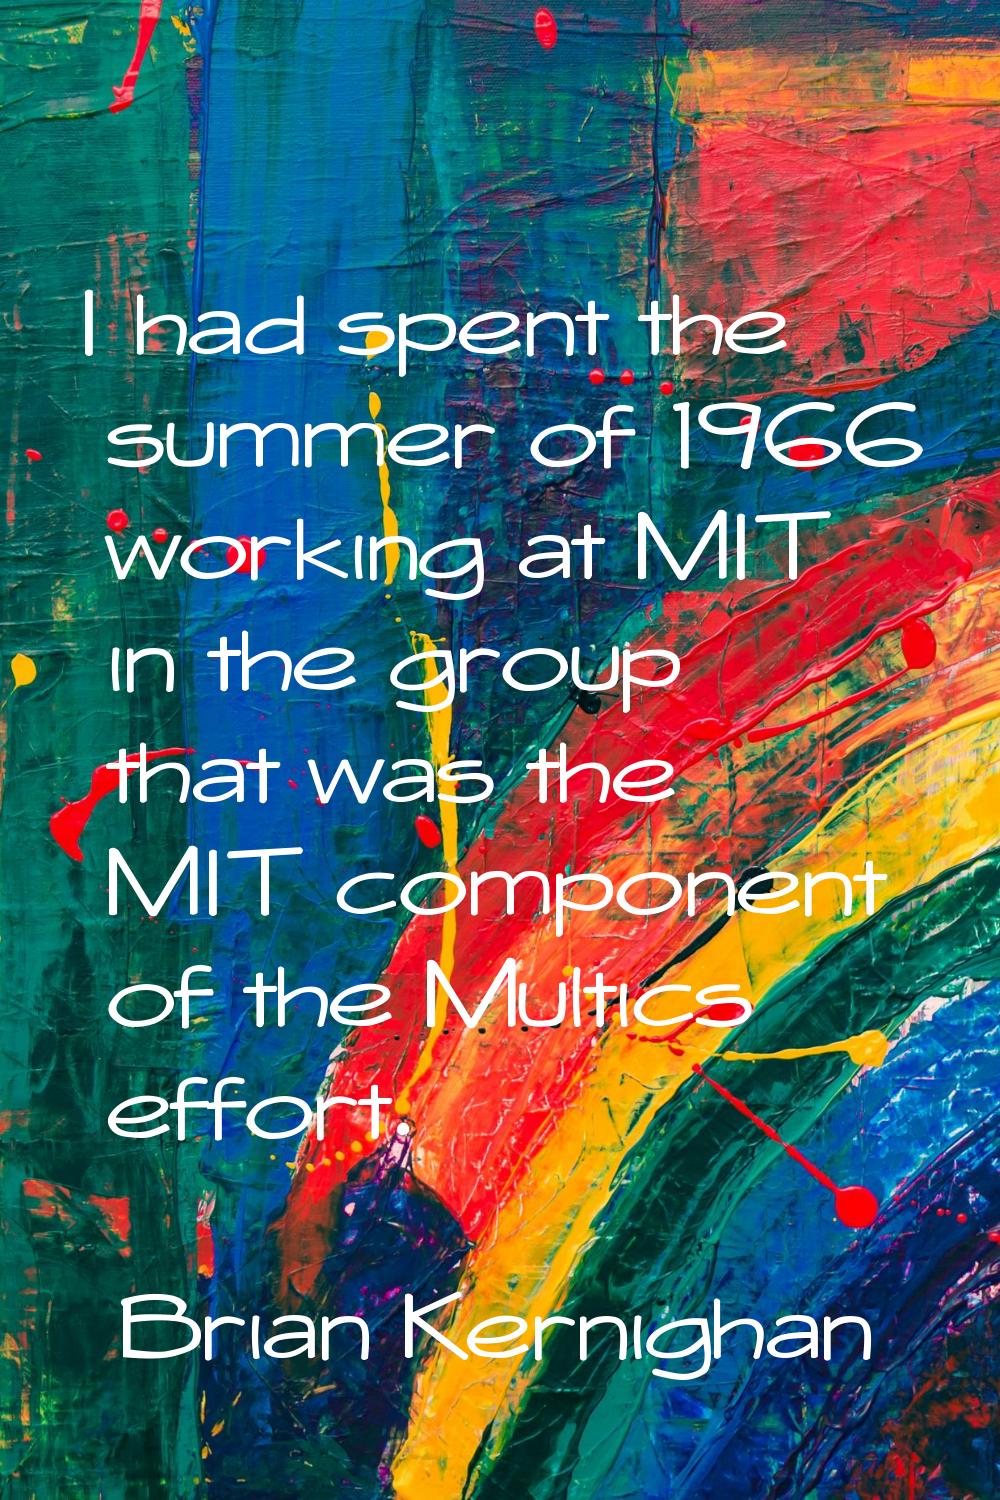 I had spent the summer of 1966 working at MIT in the group that was the MIT component of the Multic